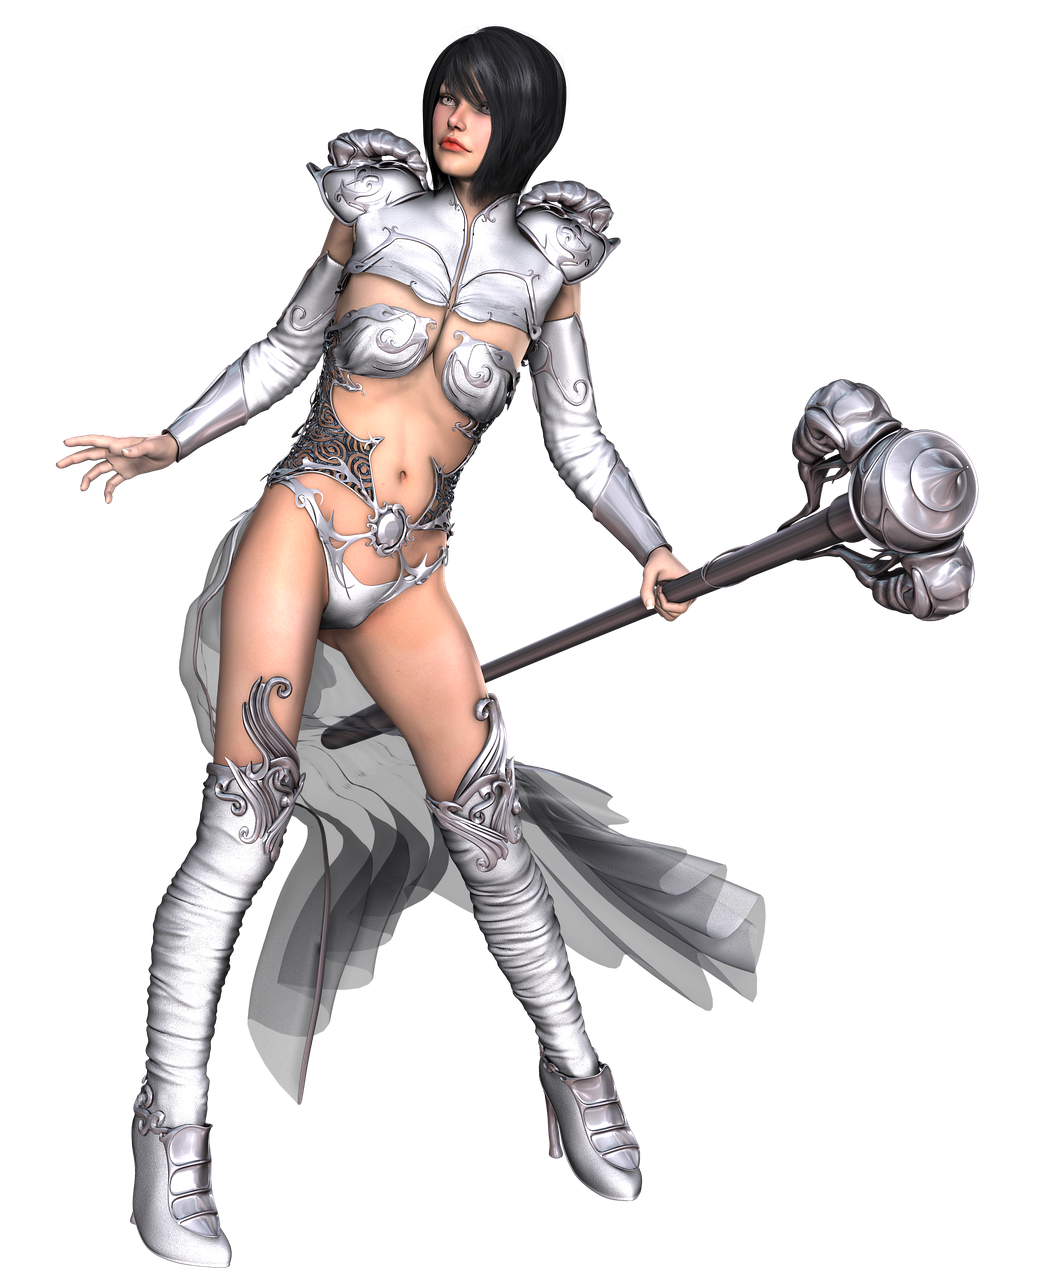 a woman dressed in silver holding a sword, by senior character artist, zbrush central contest winner, fantasy art, 3 d white shiny thick, sorceress woman, bikini armor female knight, black - haired mage